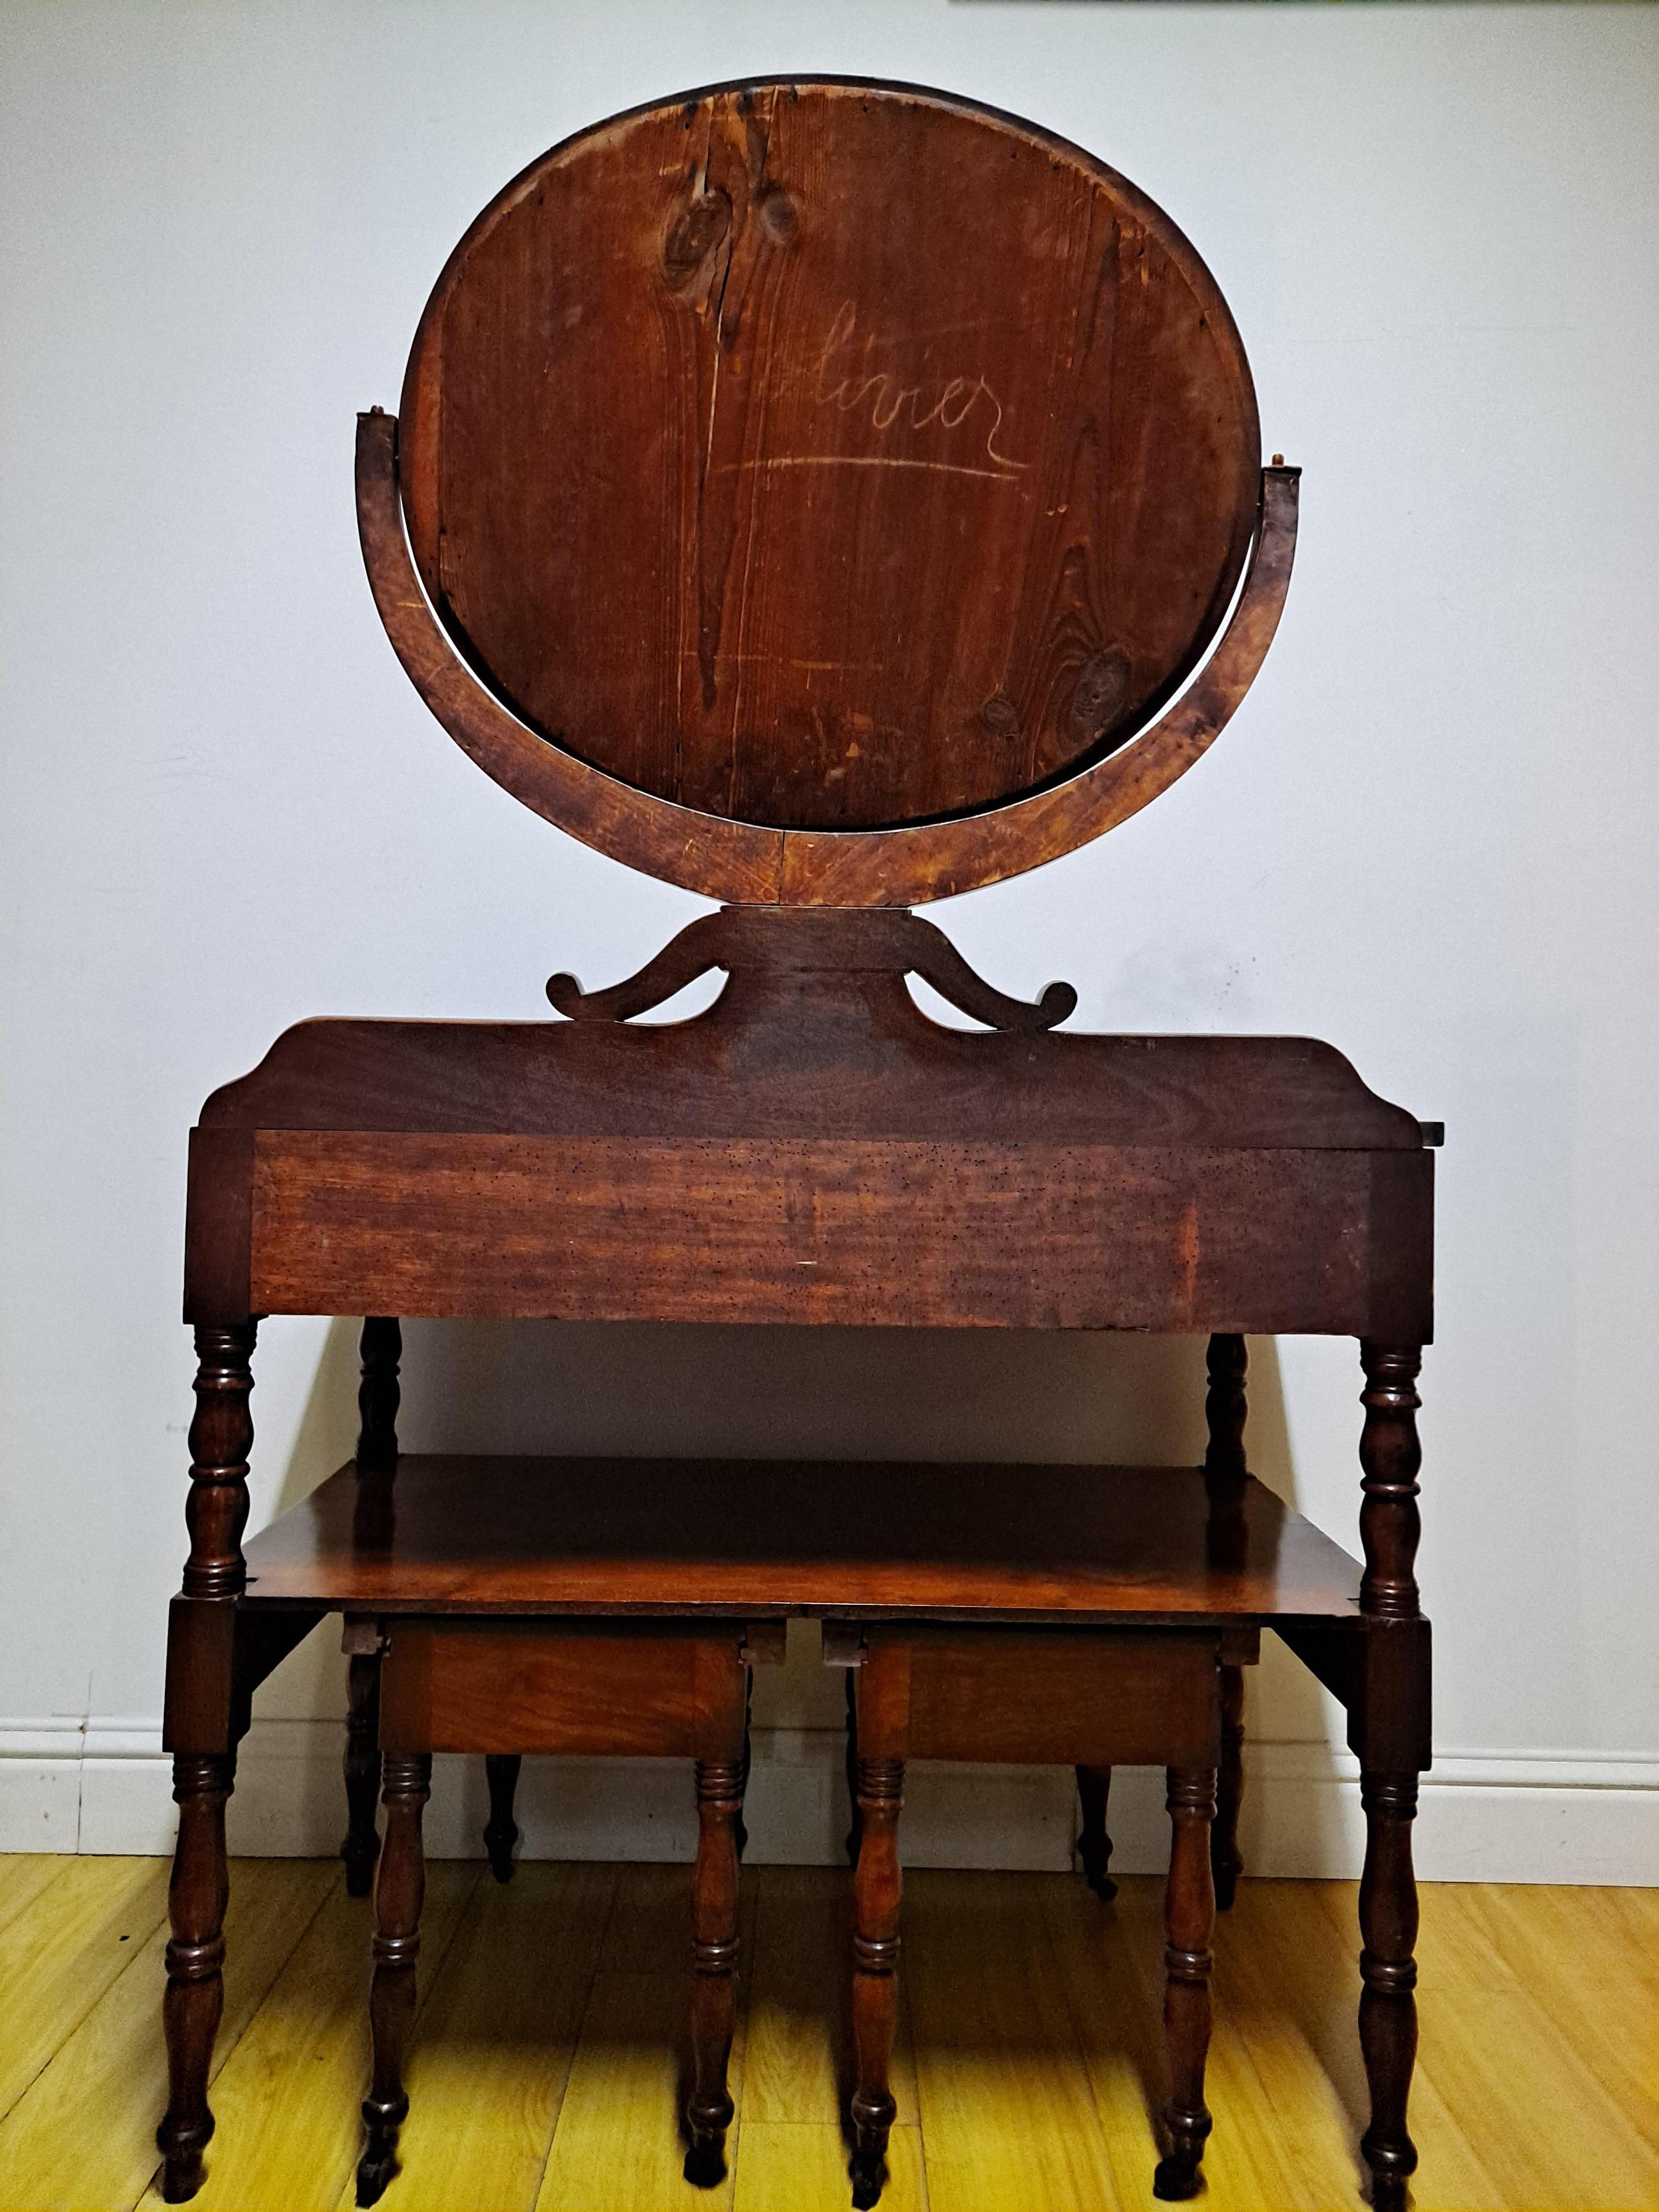 Brass 19th C. American Empire Mahogany Vanity Dressing Table w/Marble Top For Sale